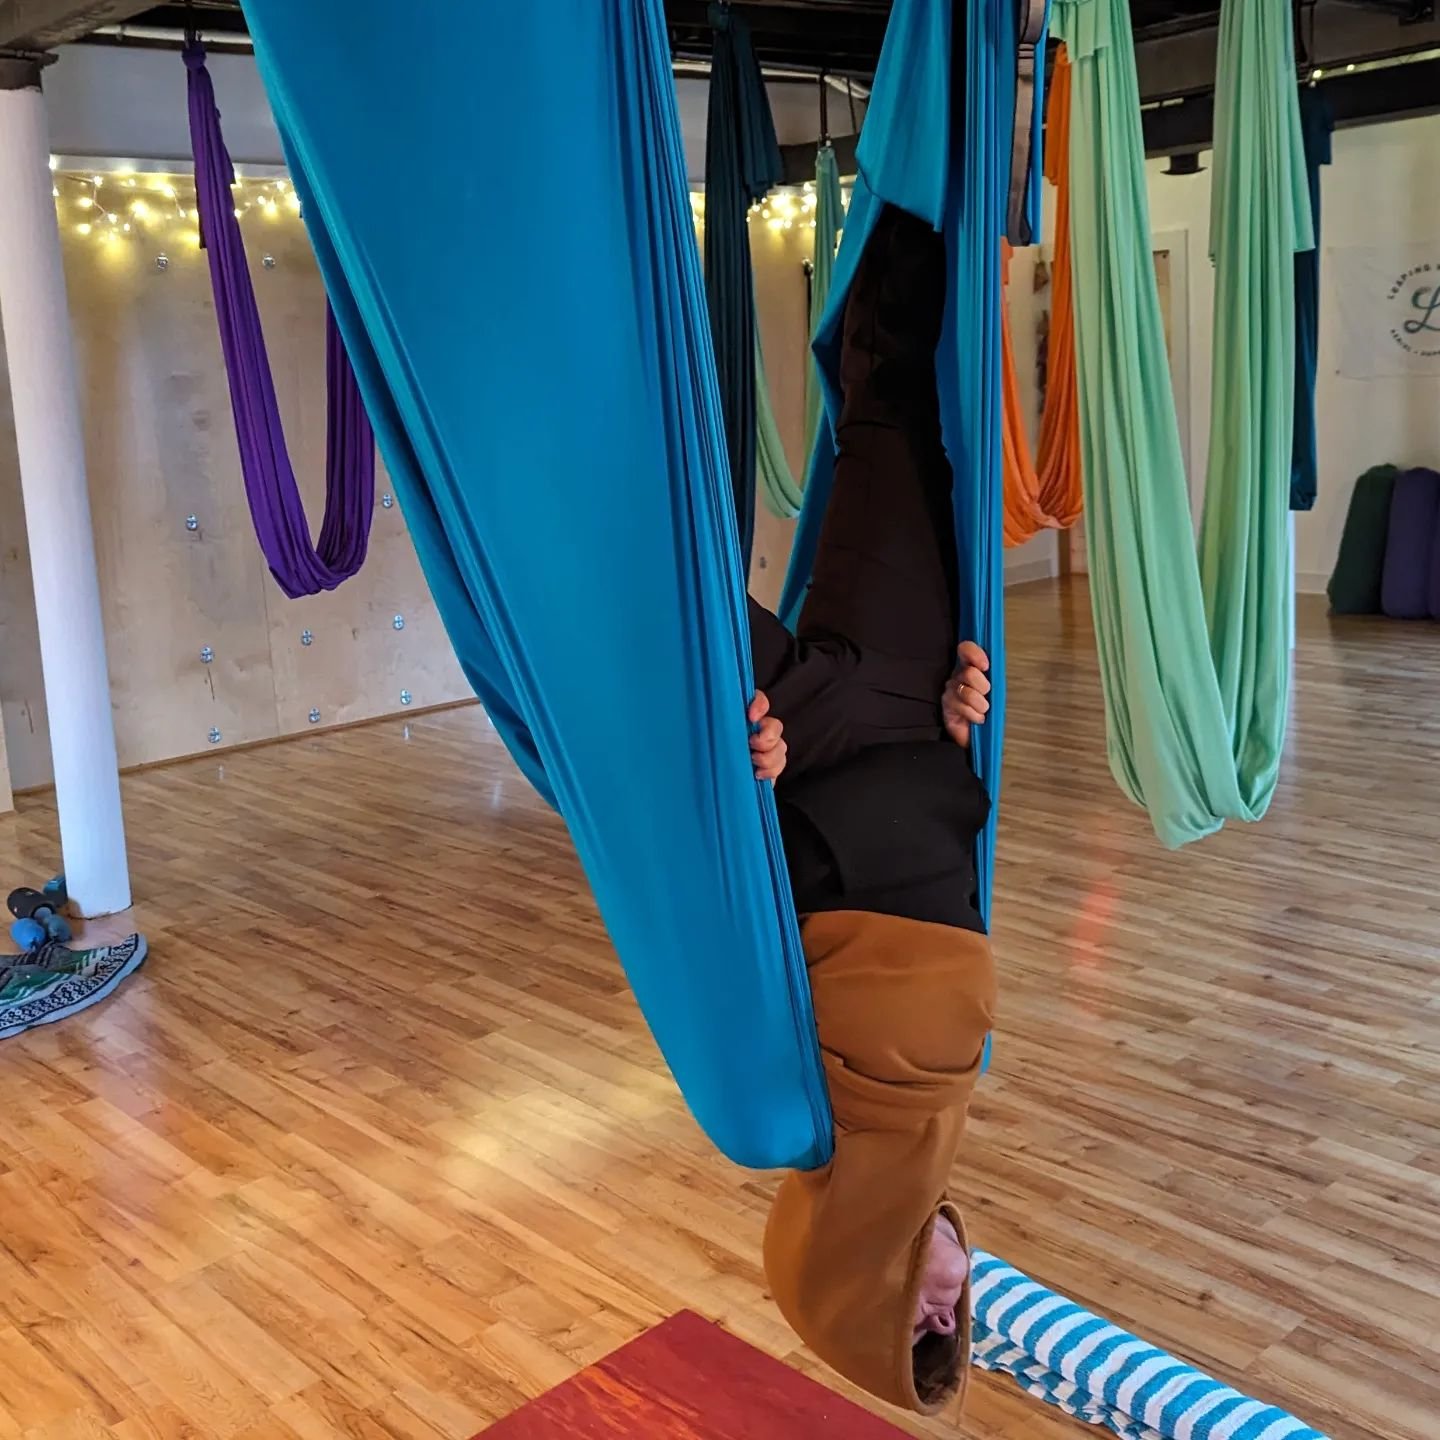 Inversions boost lymphatic return, helping you  stay well &amp; detoxified 🤸🏻 promote better sleep, rest &amp; nervous system regulation 🪷 &amp; feel SO energizing at the same time

Easier than you think
&amp; Easier than staying in an unsupported